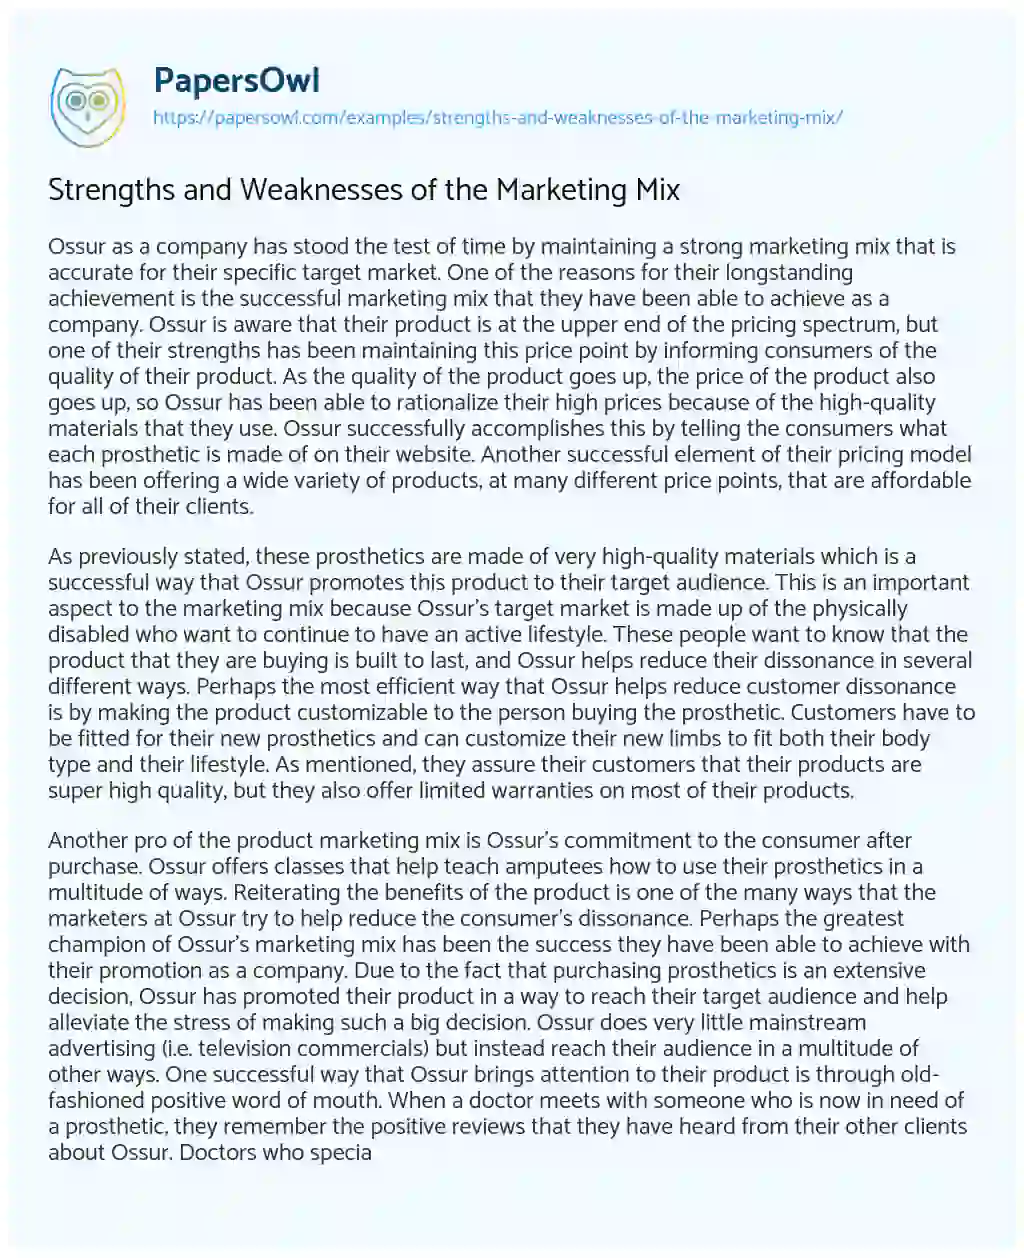 Essay on Strengths and Weaknesses of the Marketing Mix